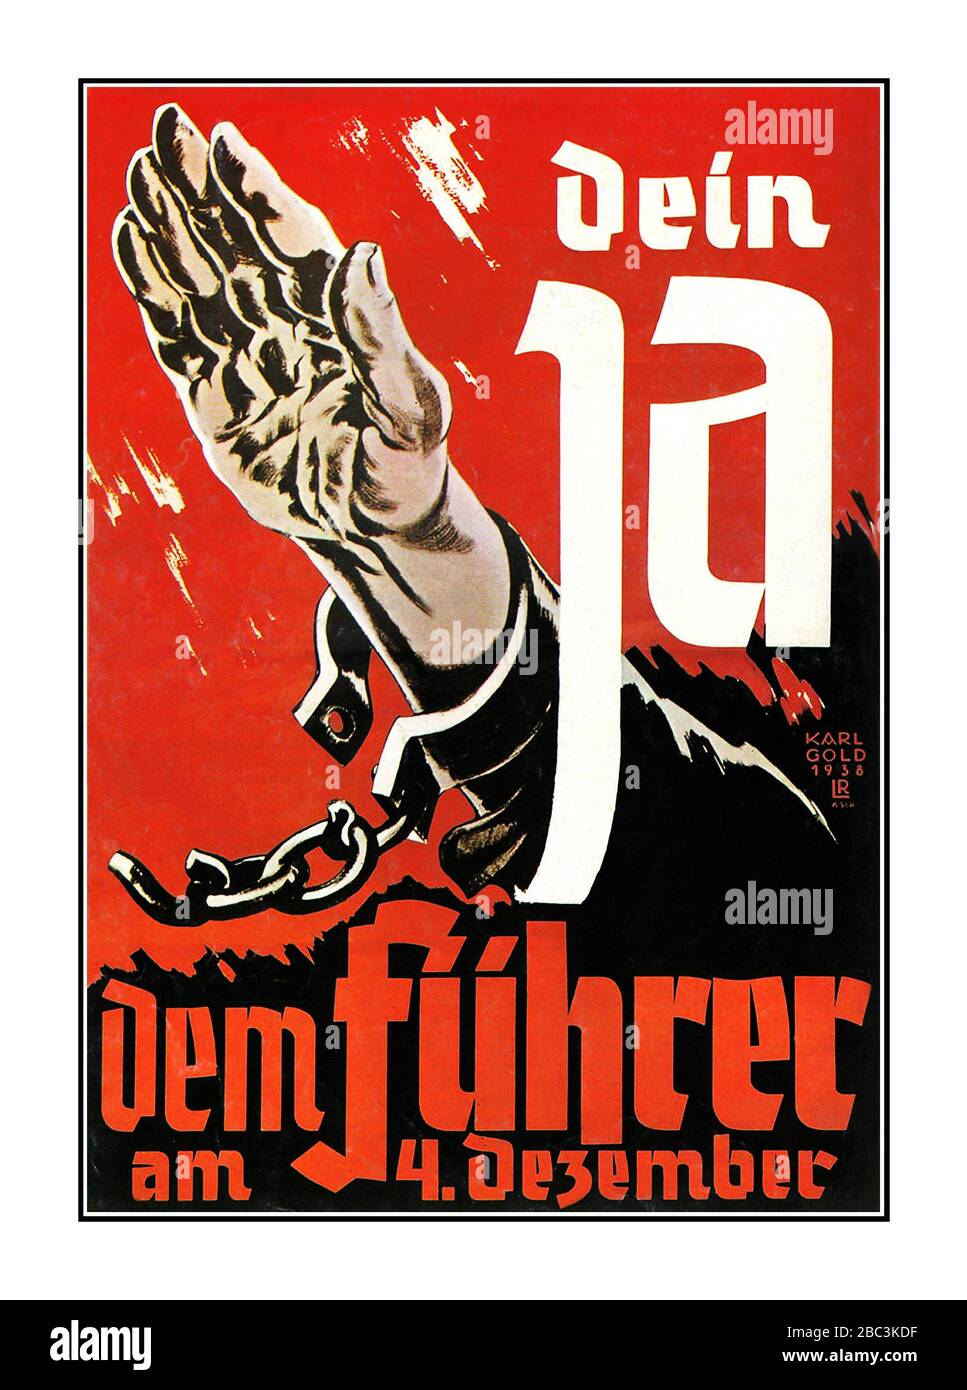 Vintage Nazi Adolf Hitler Propaganda Poster ''Your YES to the leader on 4th of December', annexed Sudetenland, 1938 Poster urging support of the annexation of Sudetenland, Czechoslovakia, 1938 .Election poster for the Sudeten German by-elections. The Sudeten Germans cast their vote  4th December for annexation of Sudetenland to the German Third Reich. Stock Photo